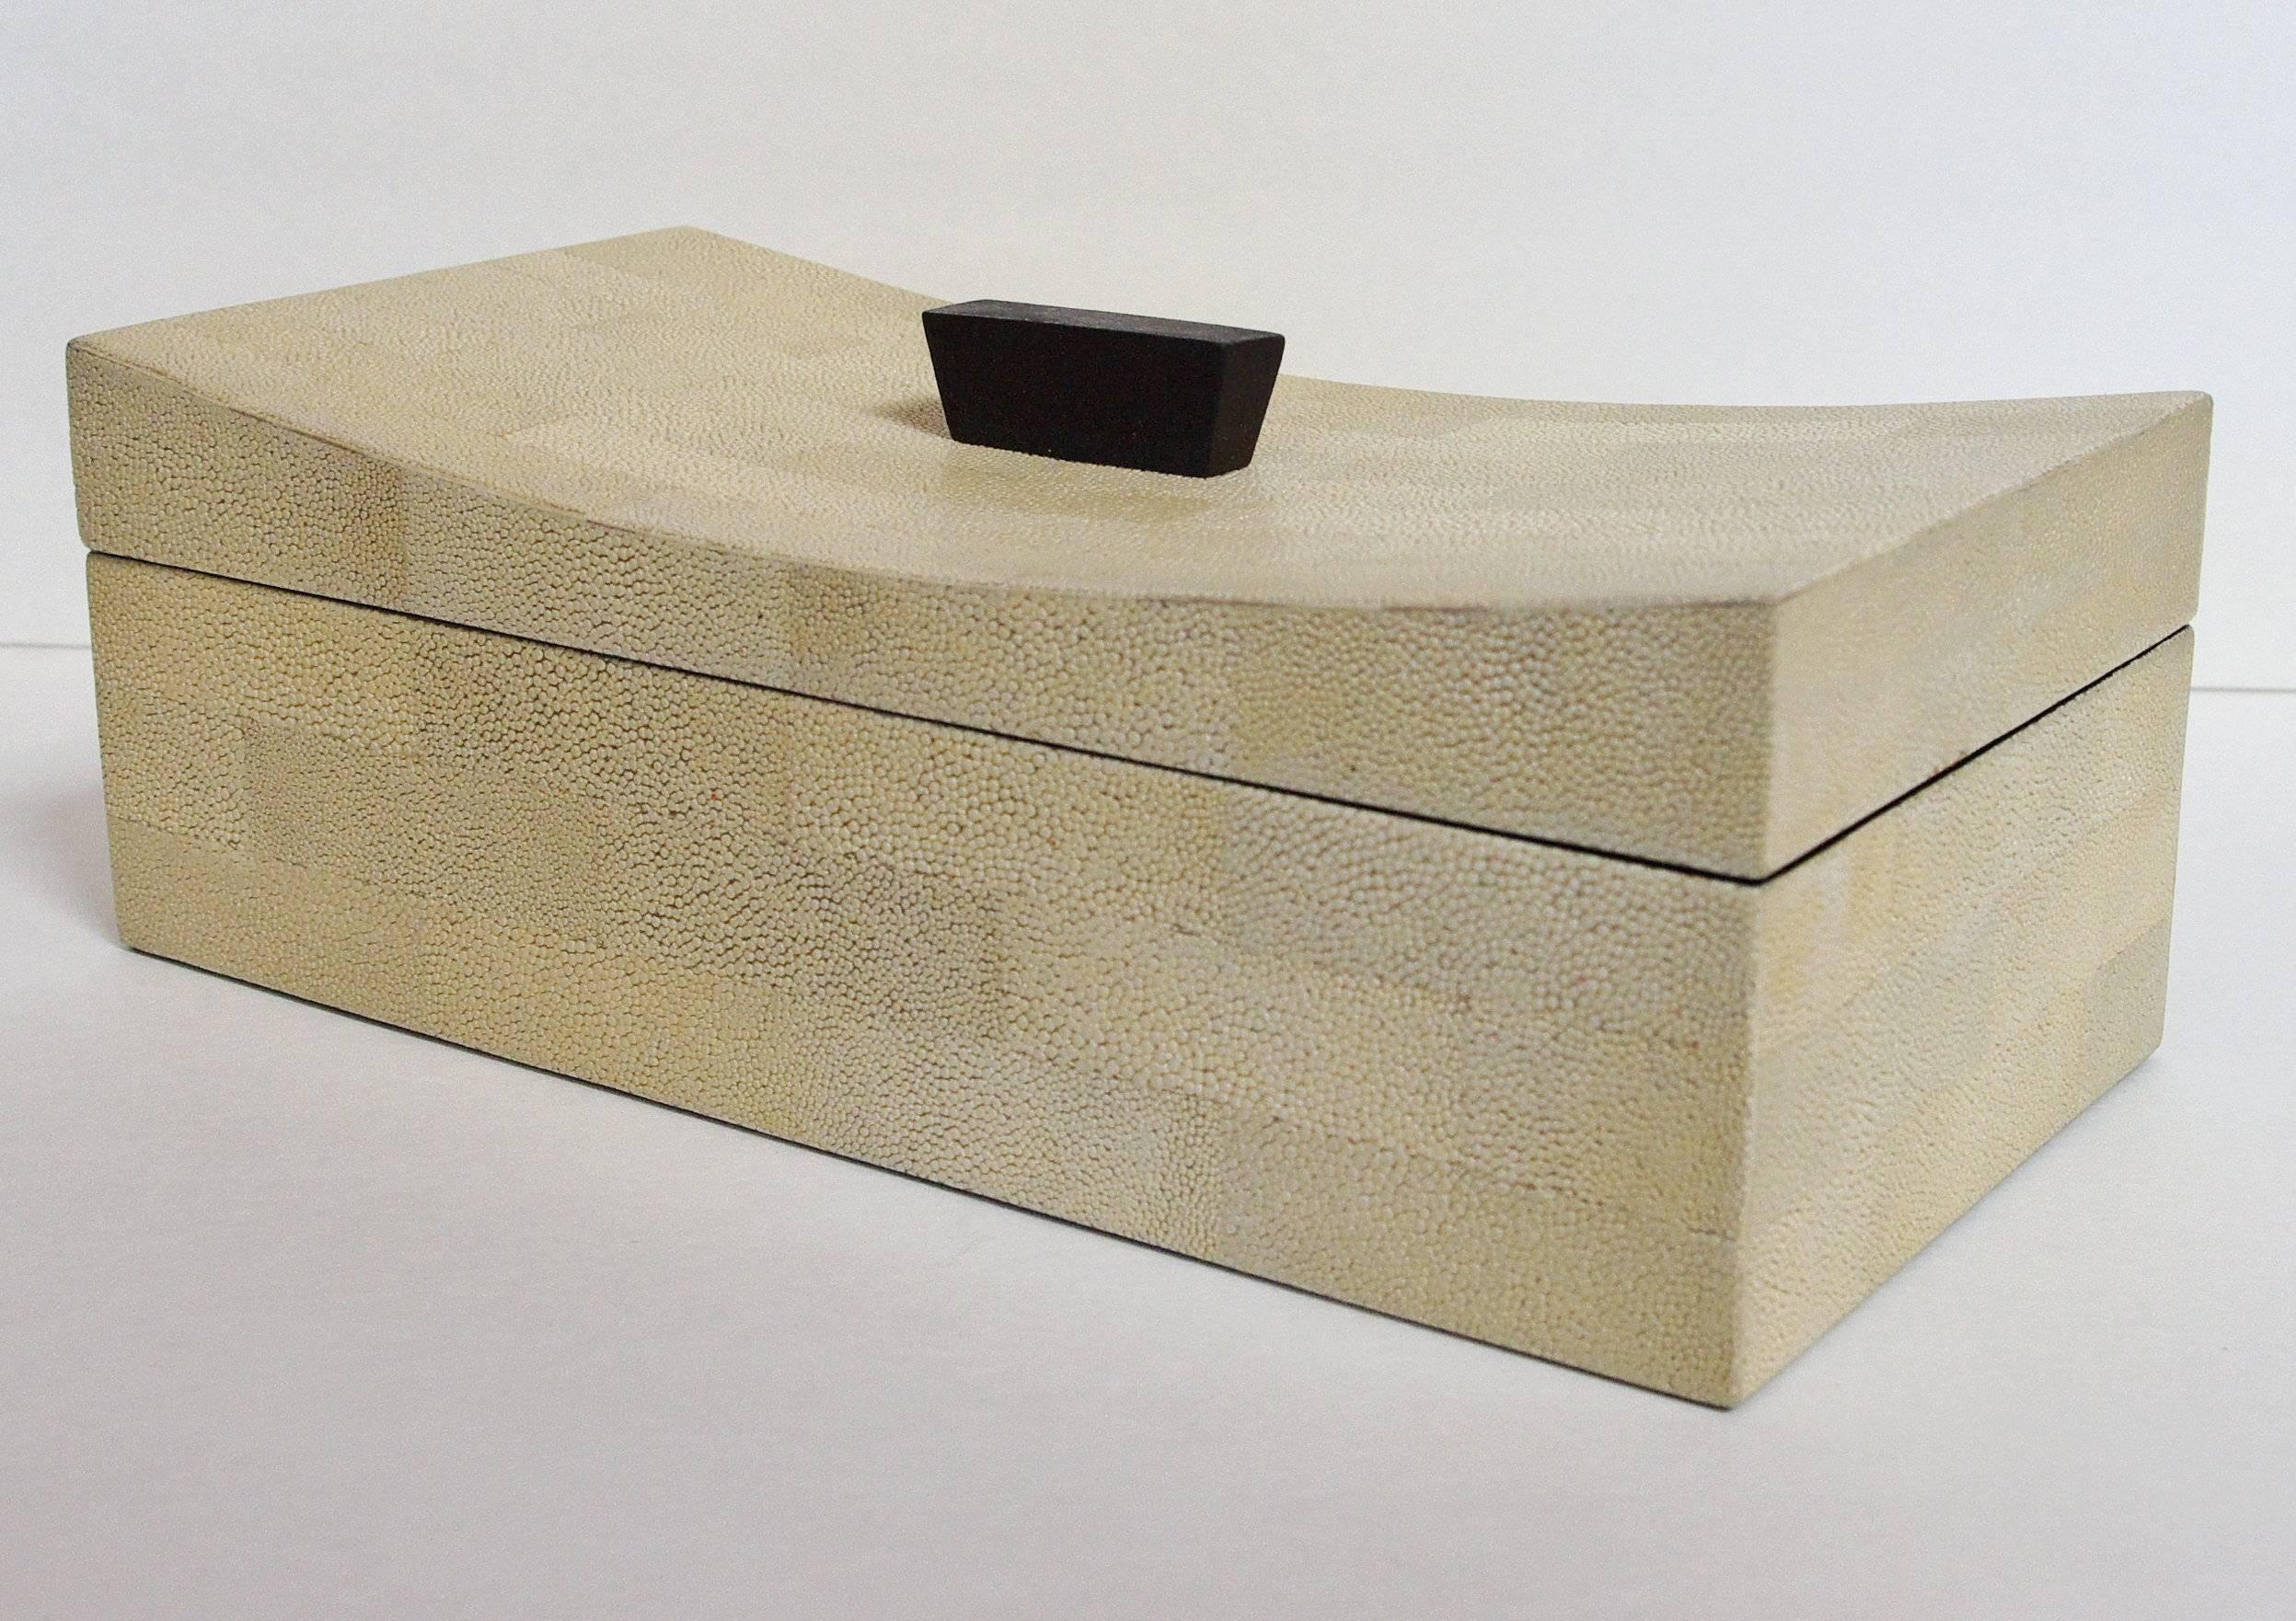 Beige shagreen box with curved lid with gray suede interior
Depth: 5 inches / Width: 10 inches / Height: 3 inches
1 in stock in Palm Springs currently ON SALE for $699 each!!!
Order Reference #: MR18

This piece makes for great and unique gift! 